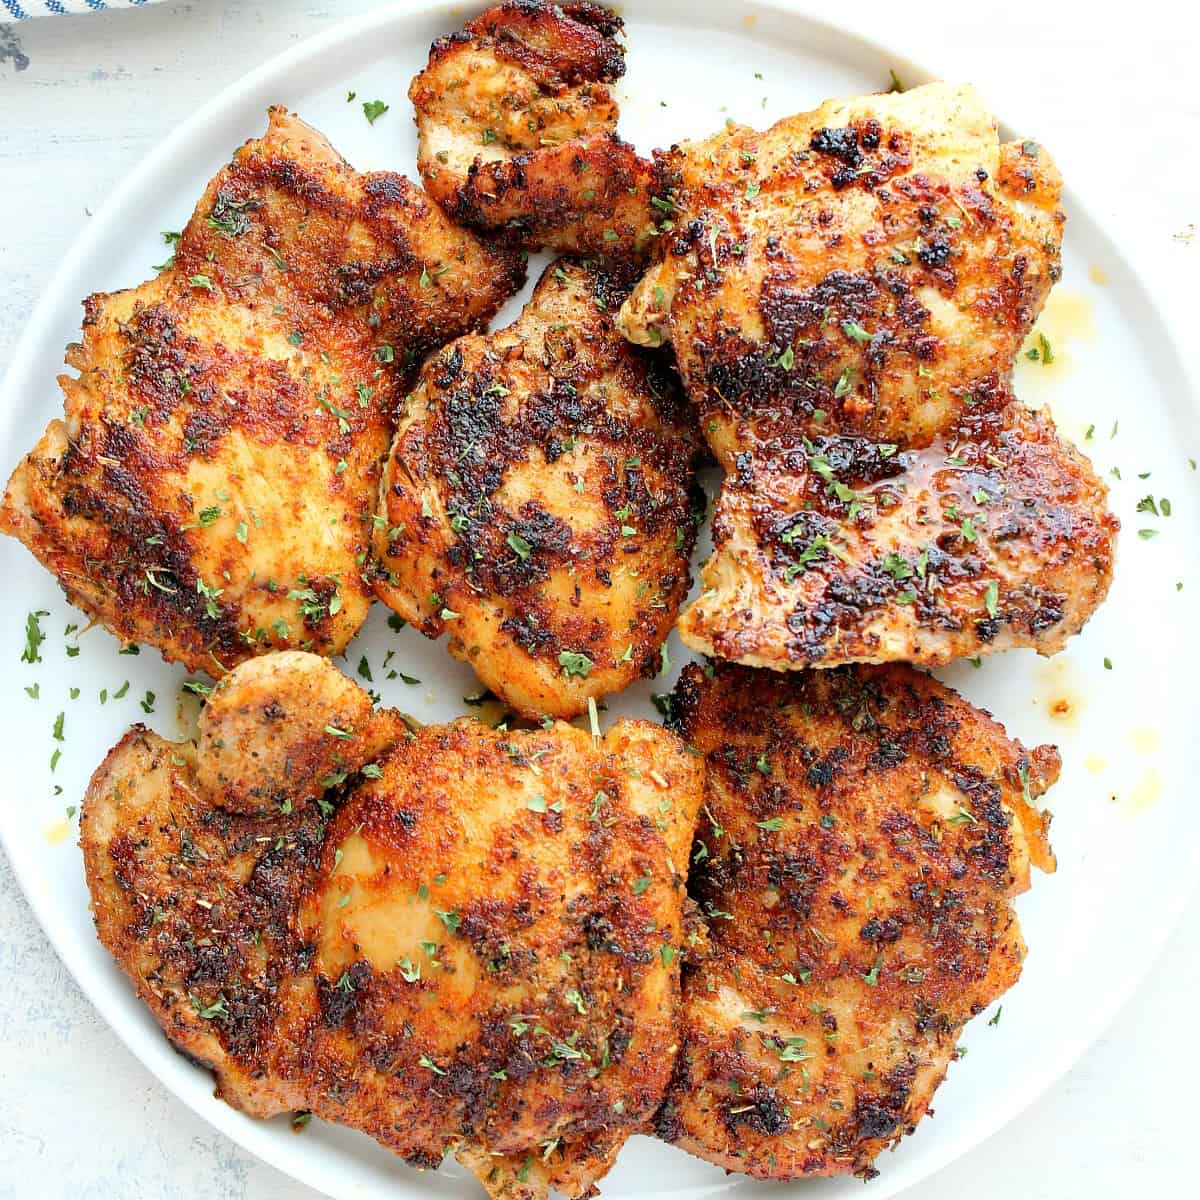 Chicken thighs on a plate.